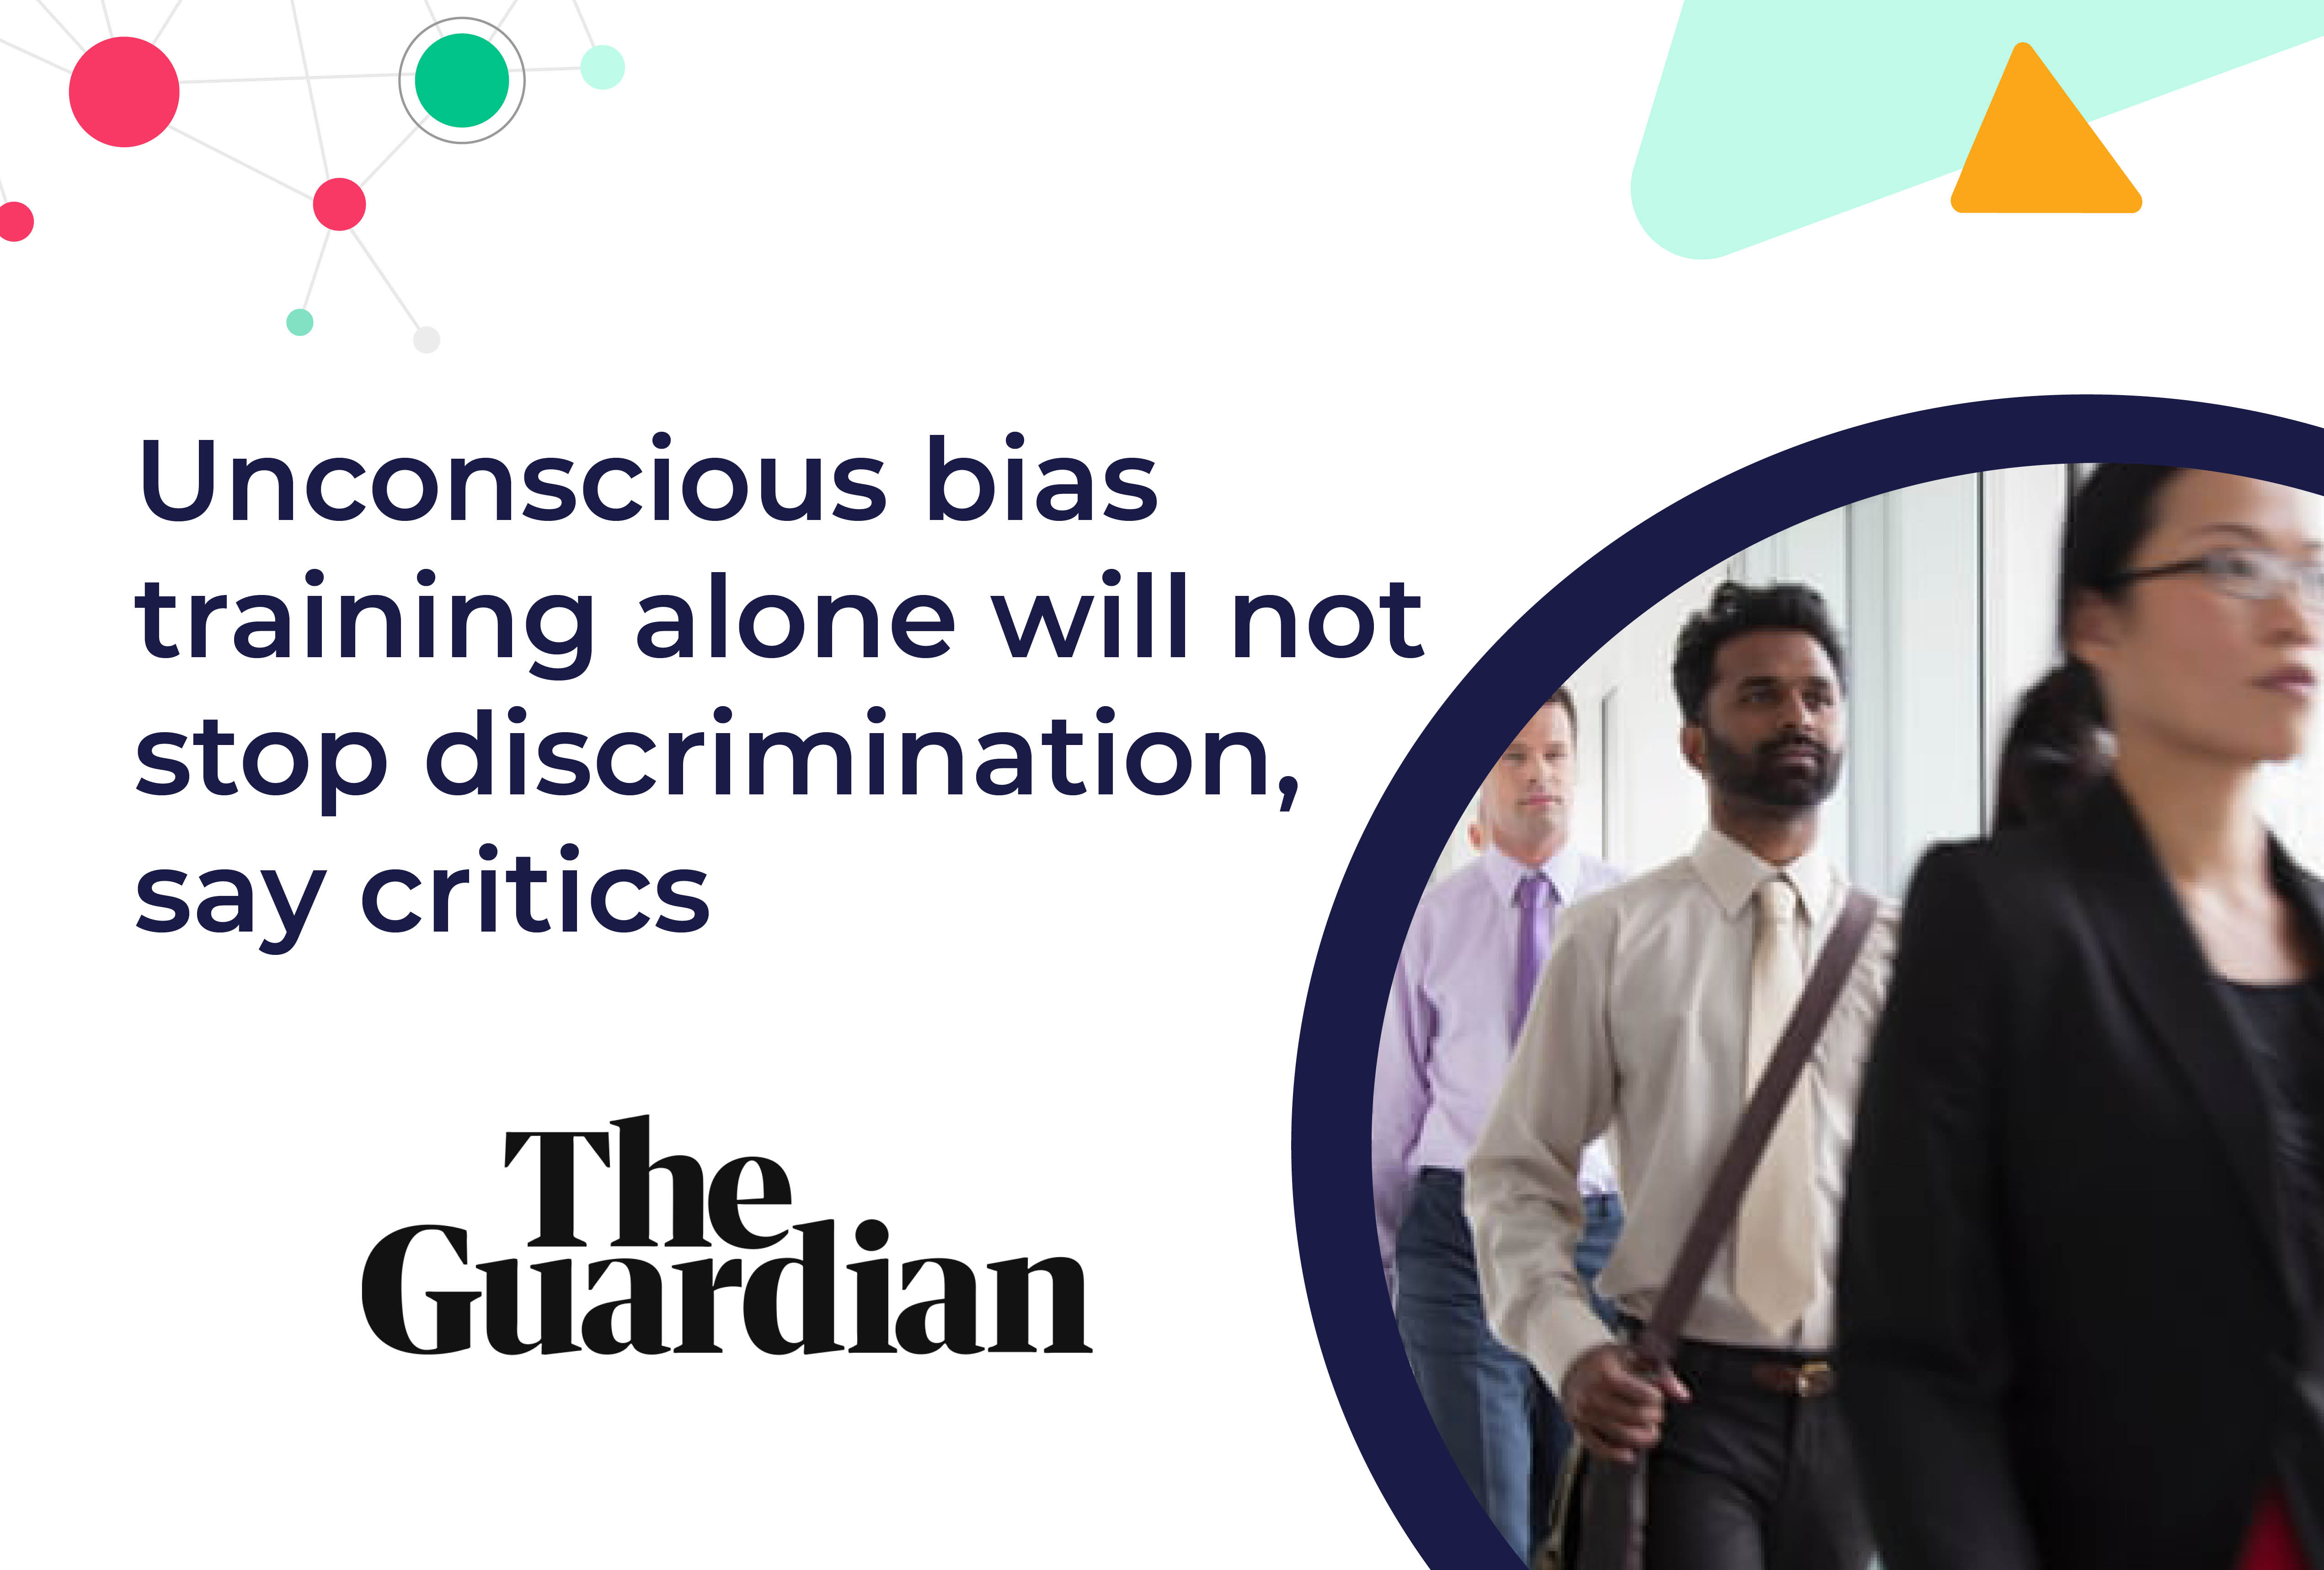 The Guardian: Unconscious bias training alone will not stop discrimination, say critics